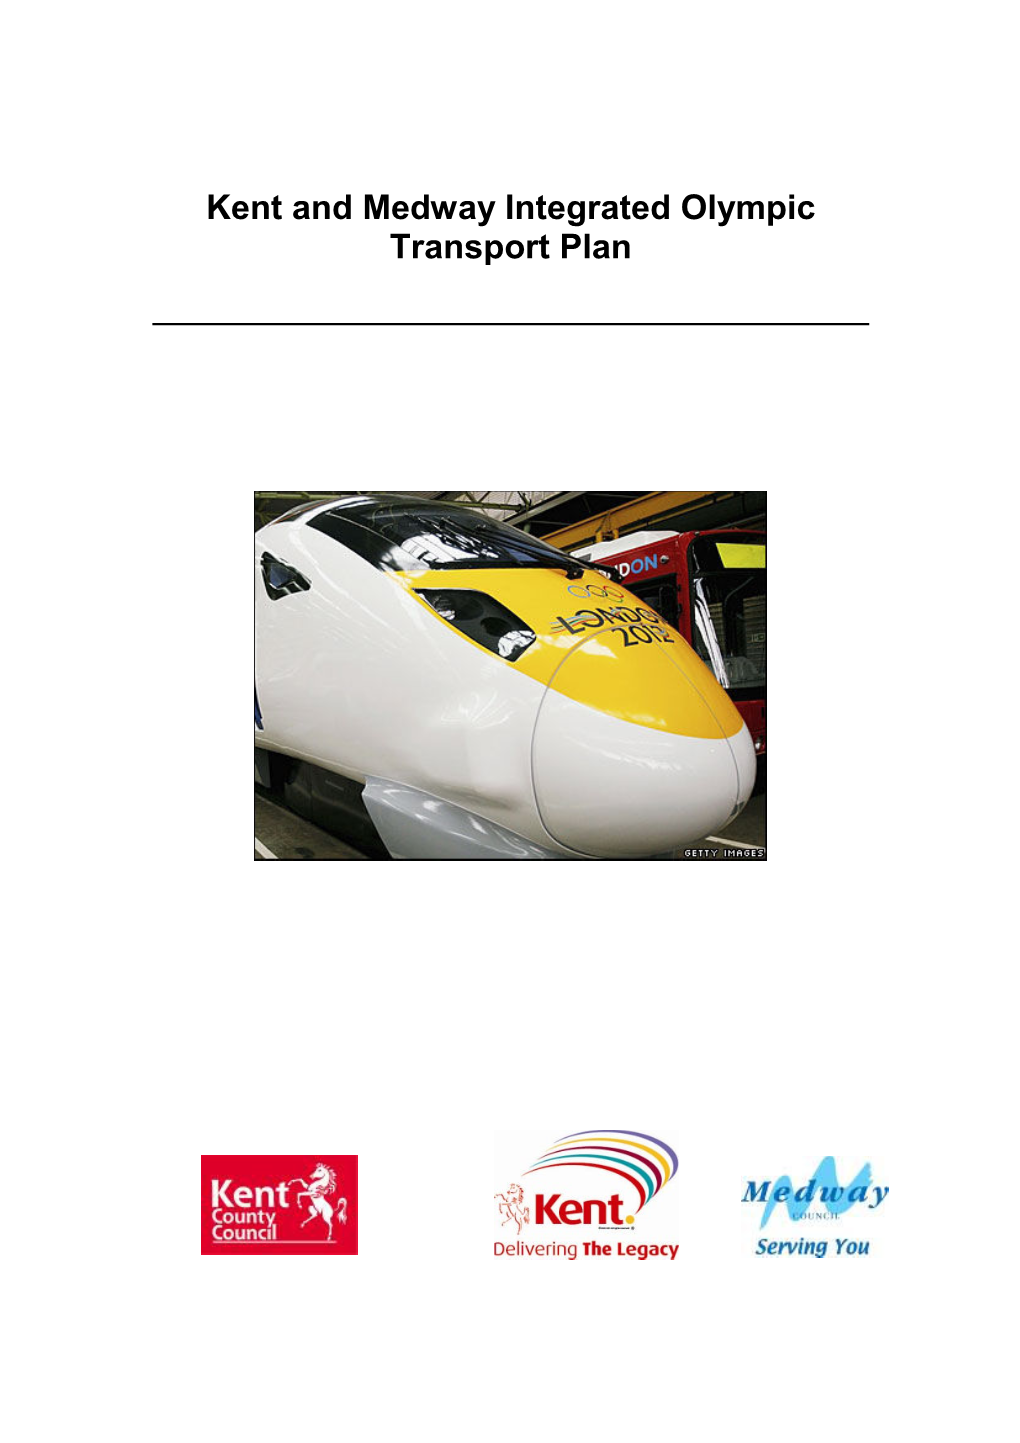 Kent and Medway Integrated Olympic Transport Plan